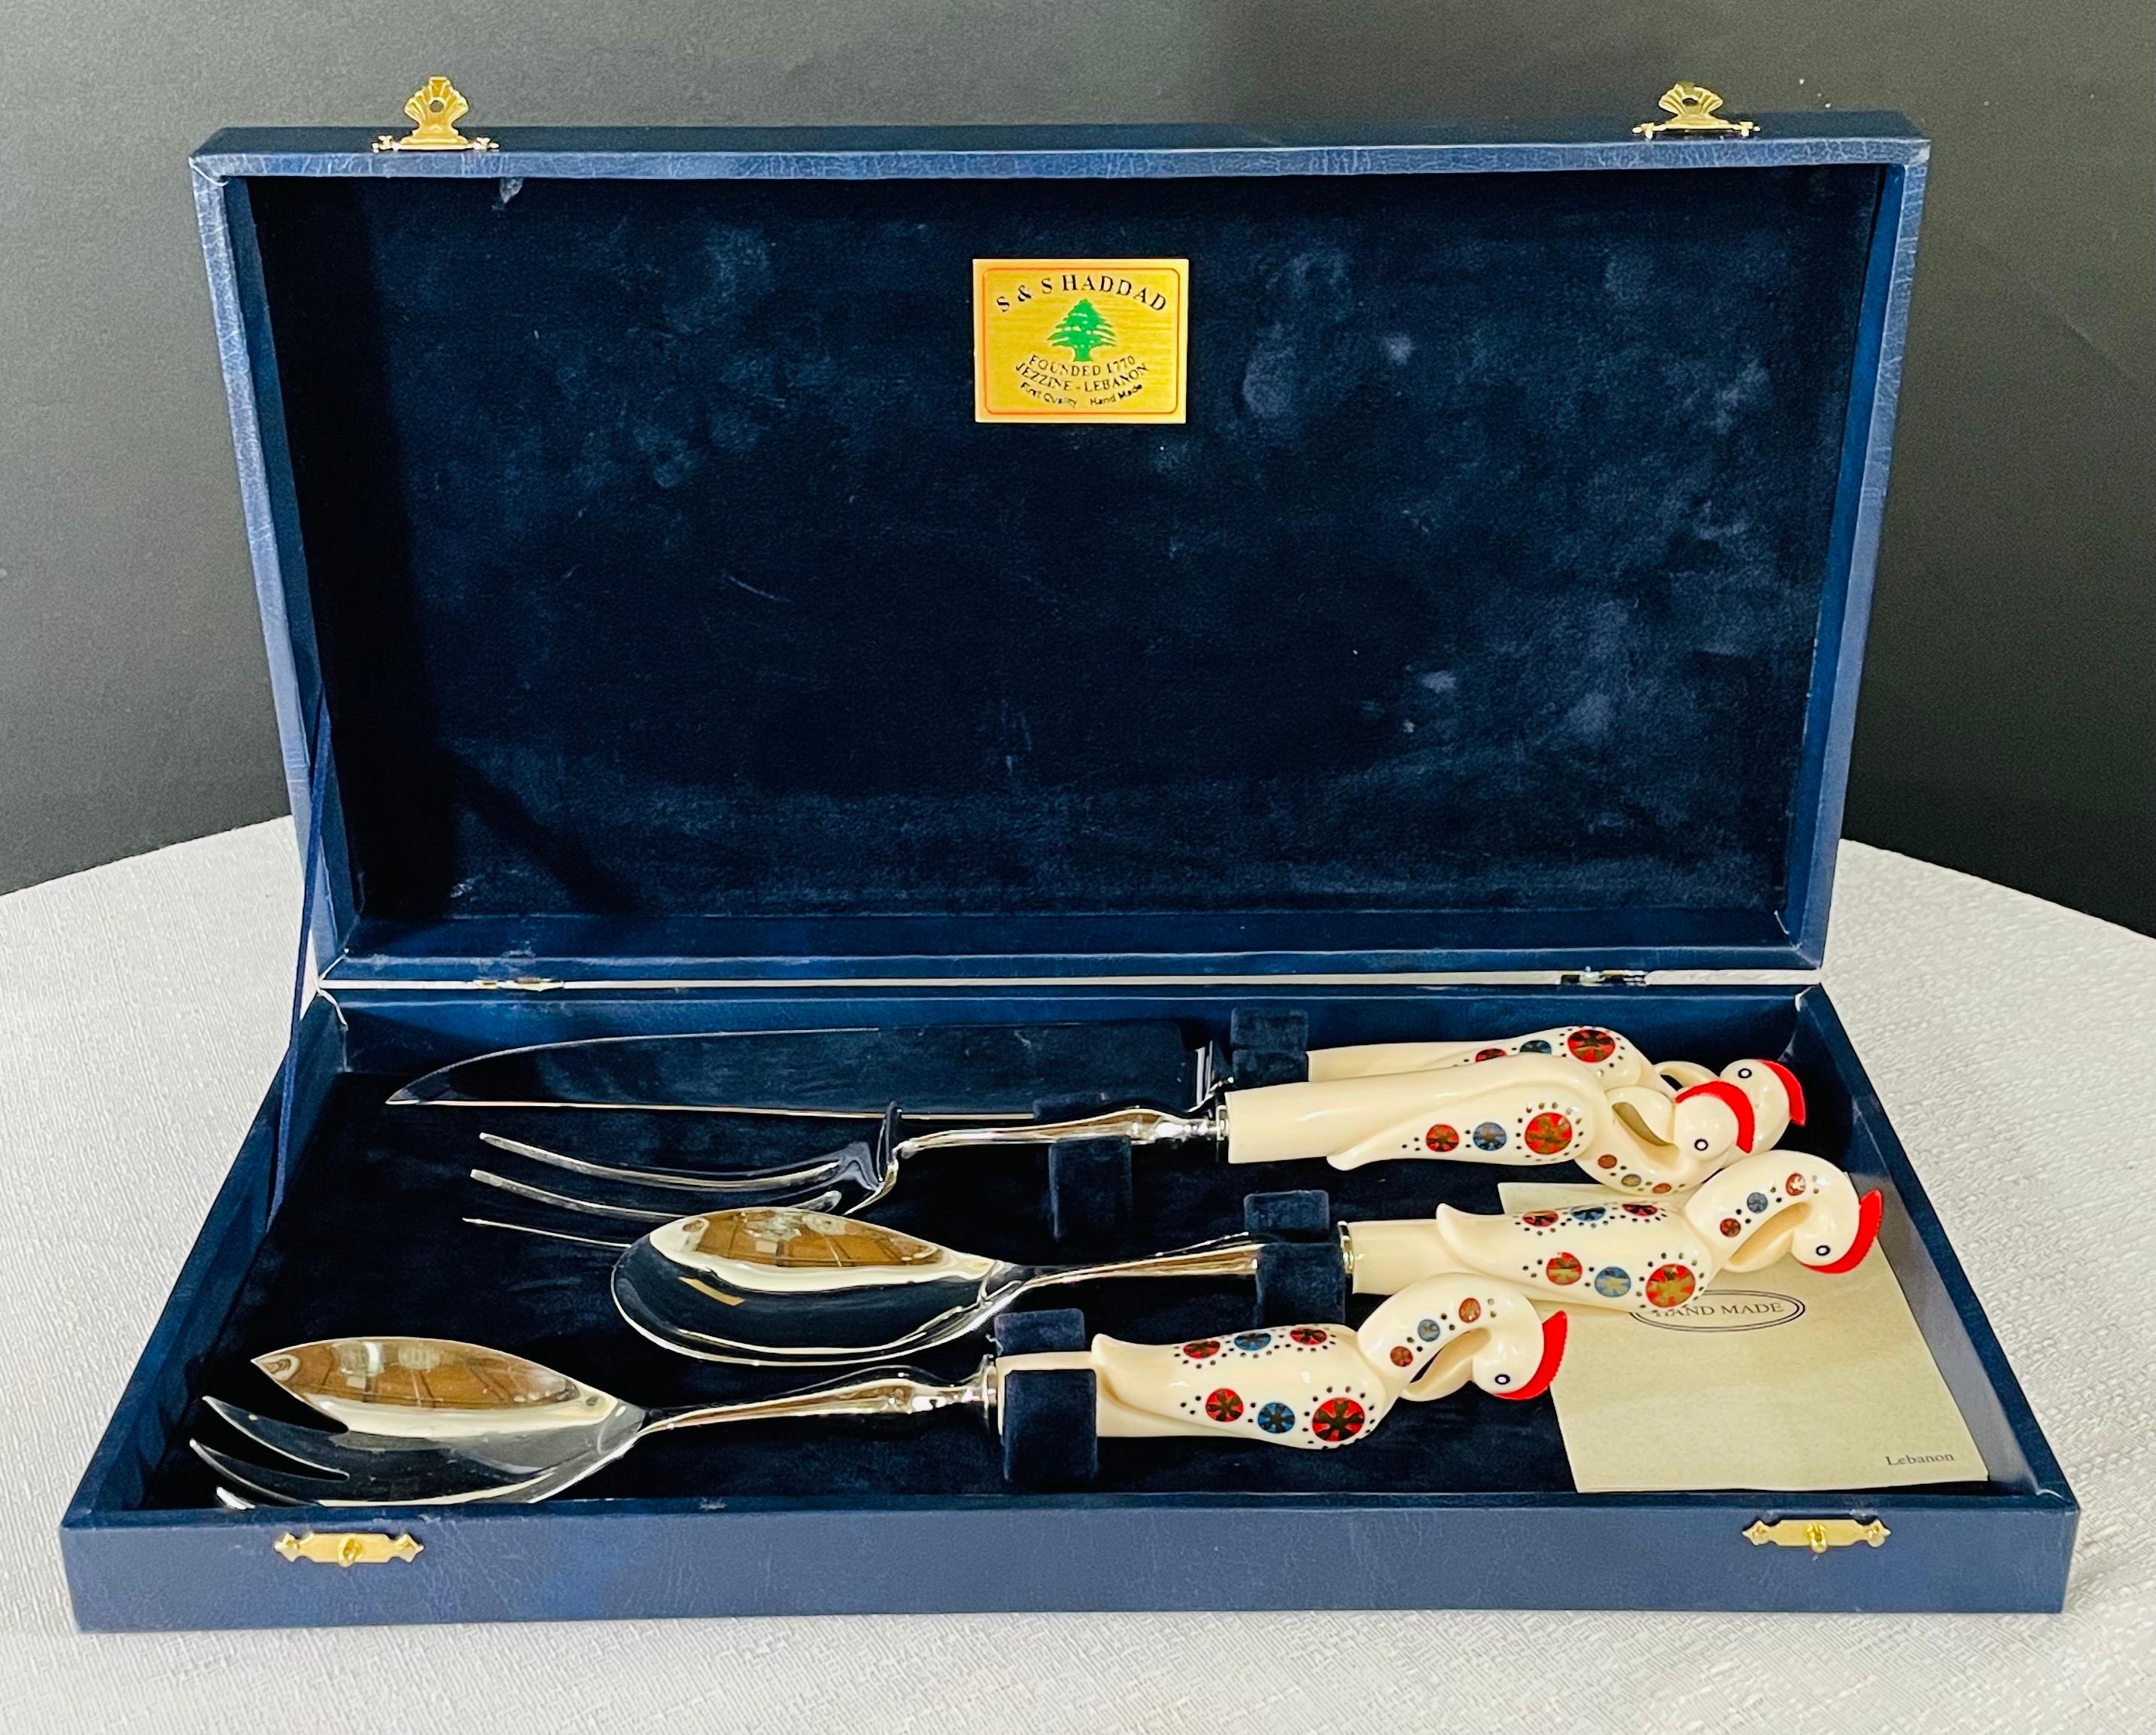 A classy vintage S & S Haddad Jezzine traditional cutlery or carving set , handmade in Lebanon of bone in Haddad iconic bird design. The set of pieces comes in it is original blue box and a certificate of authenticity. 

The set is made in